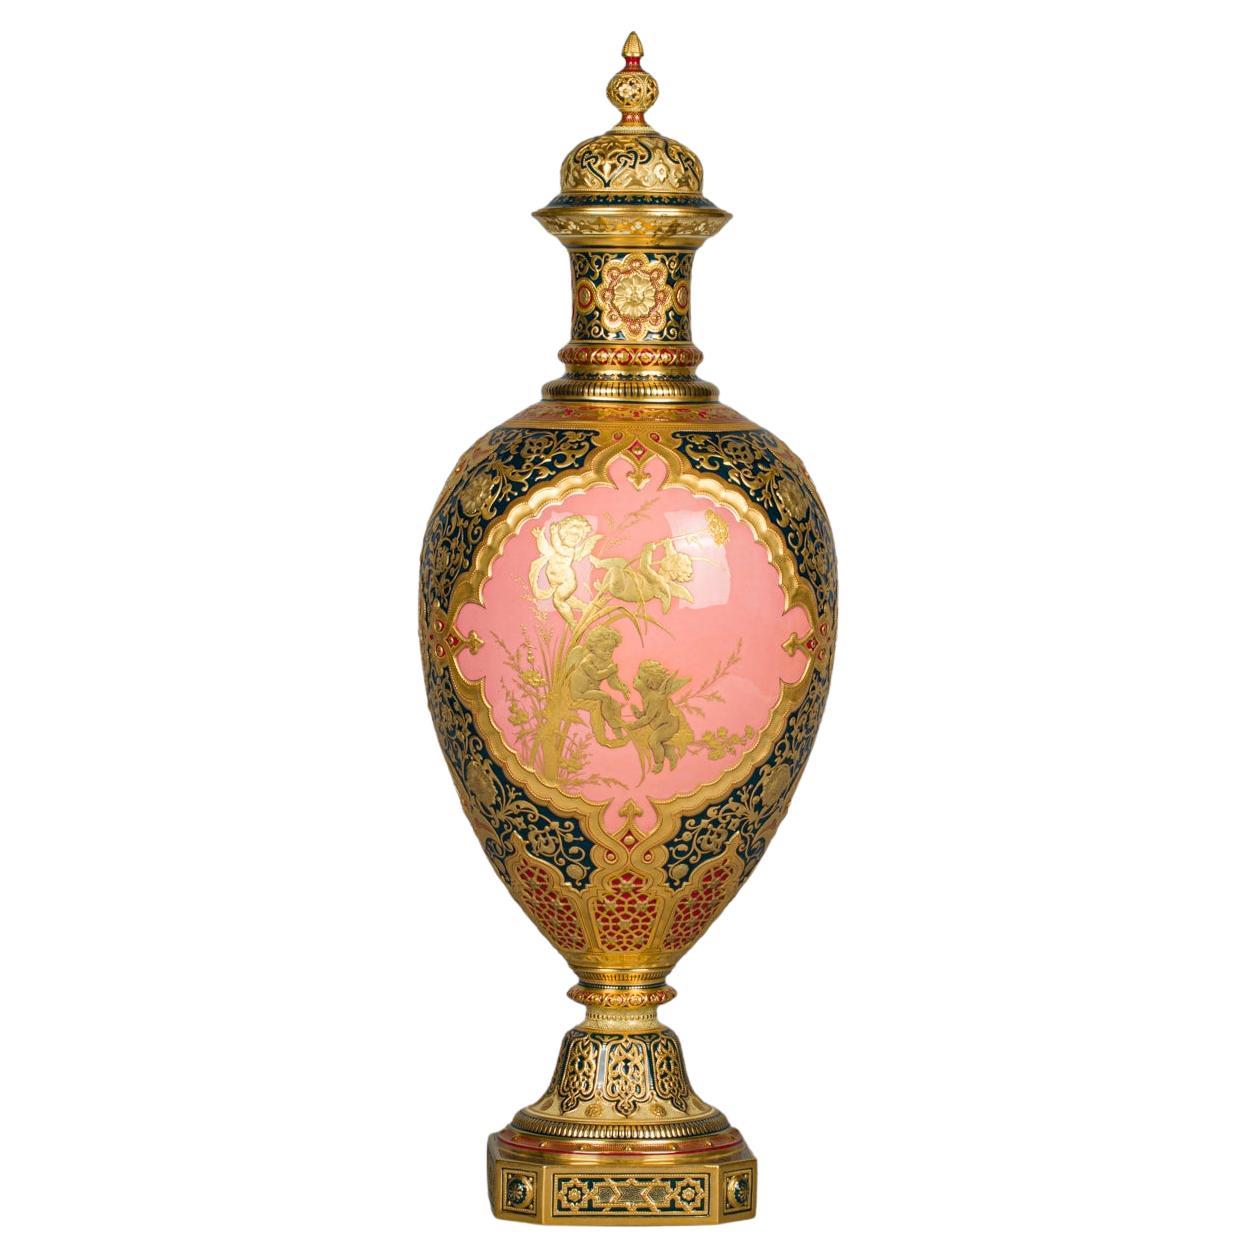 Royal Crown Derby Covered Urn, 19th Century